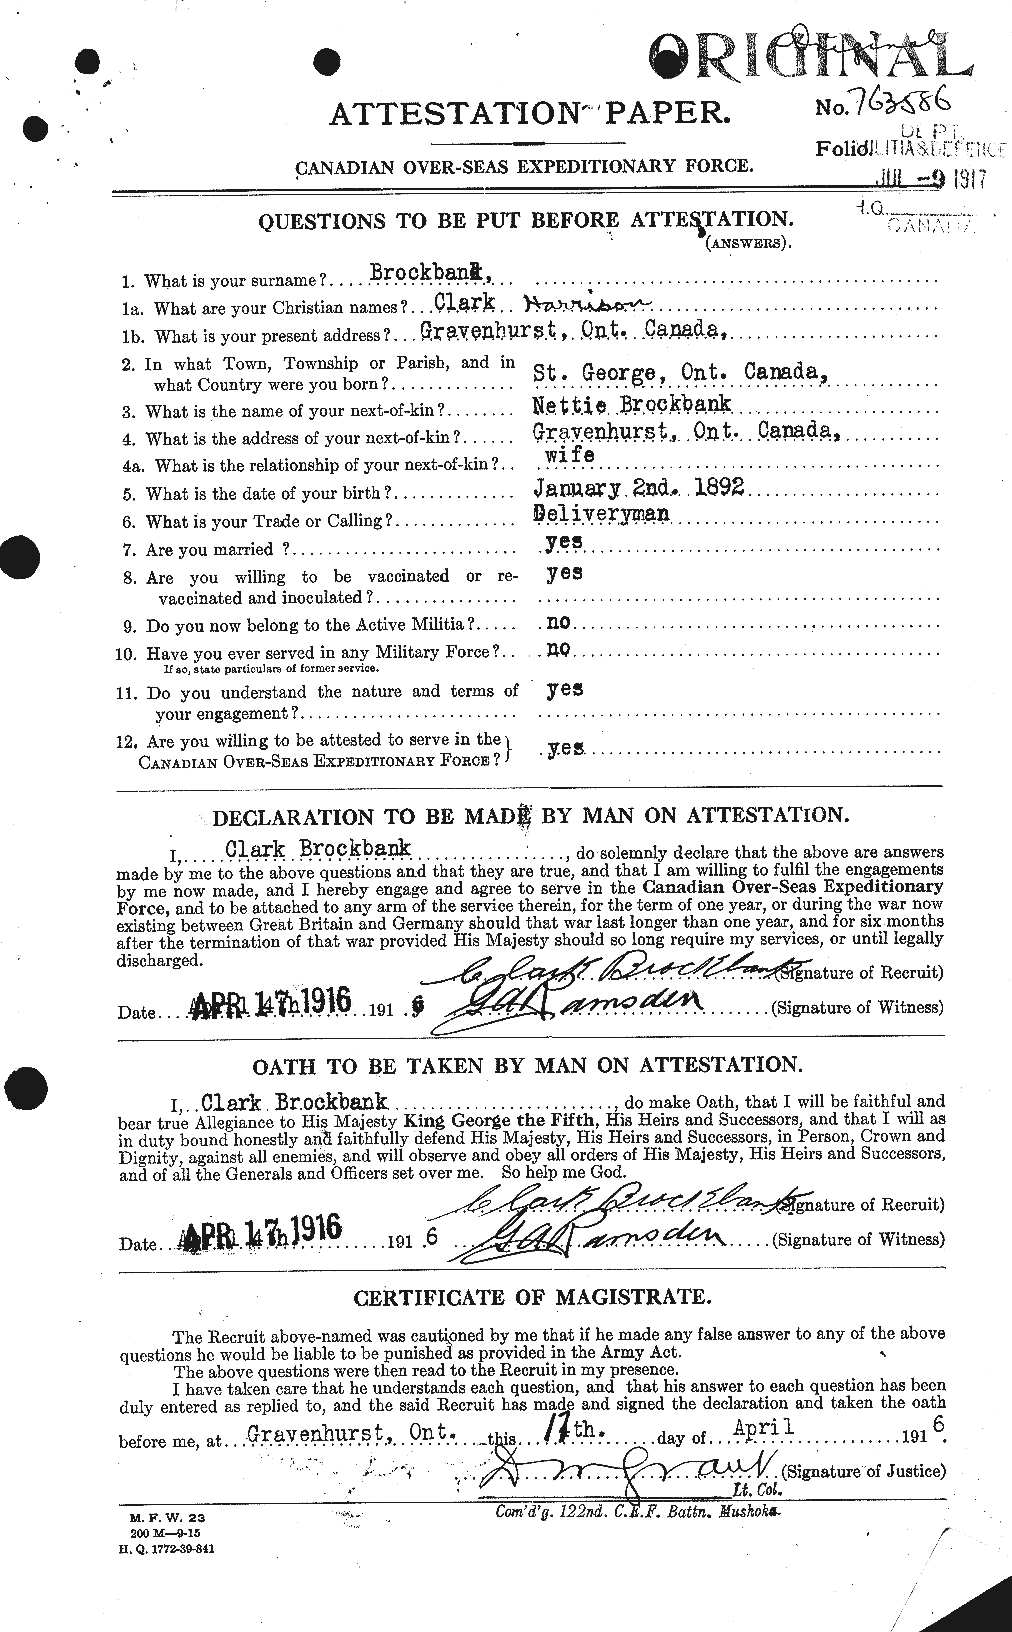 Personnel Records of the First World War - CEF 258258a